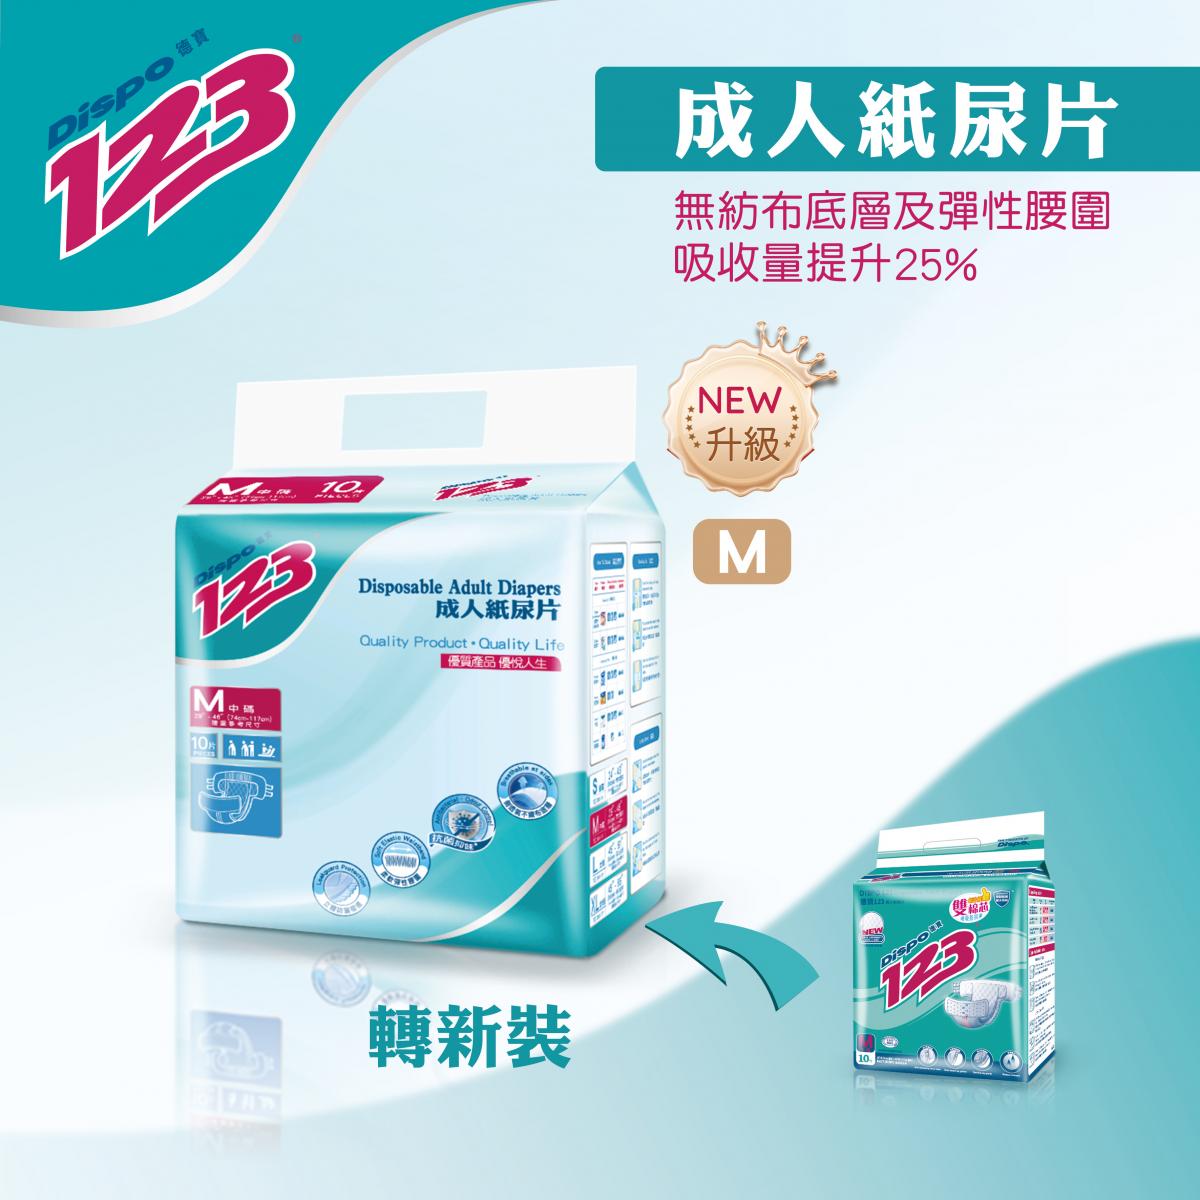 Disposable Adult Diapers M (Random Delivery)